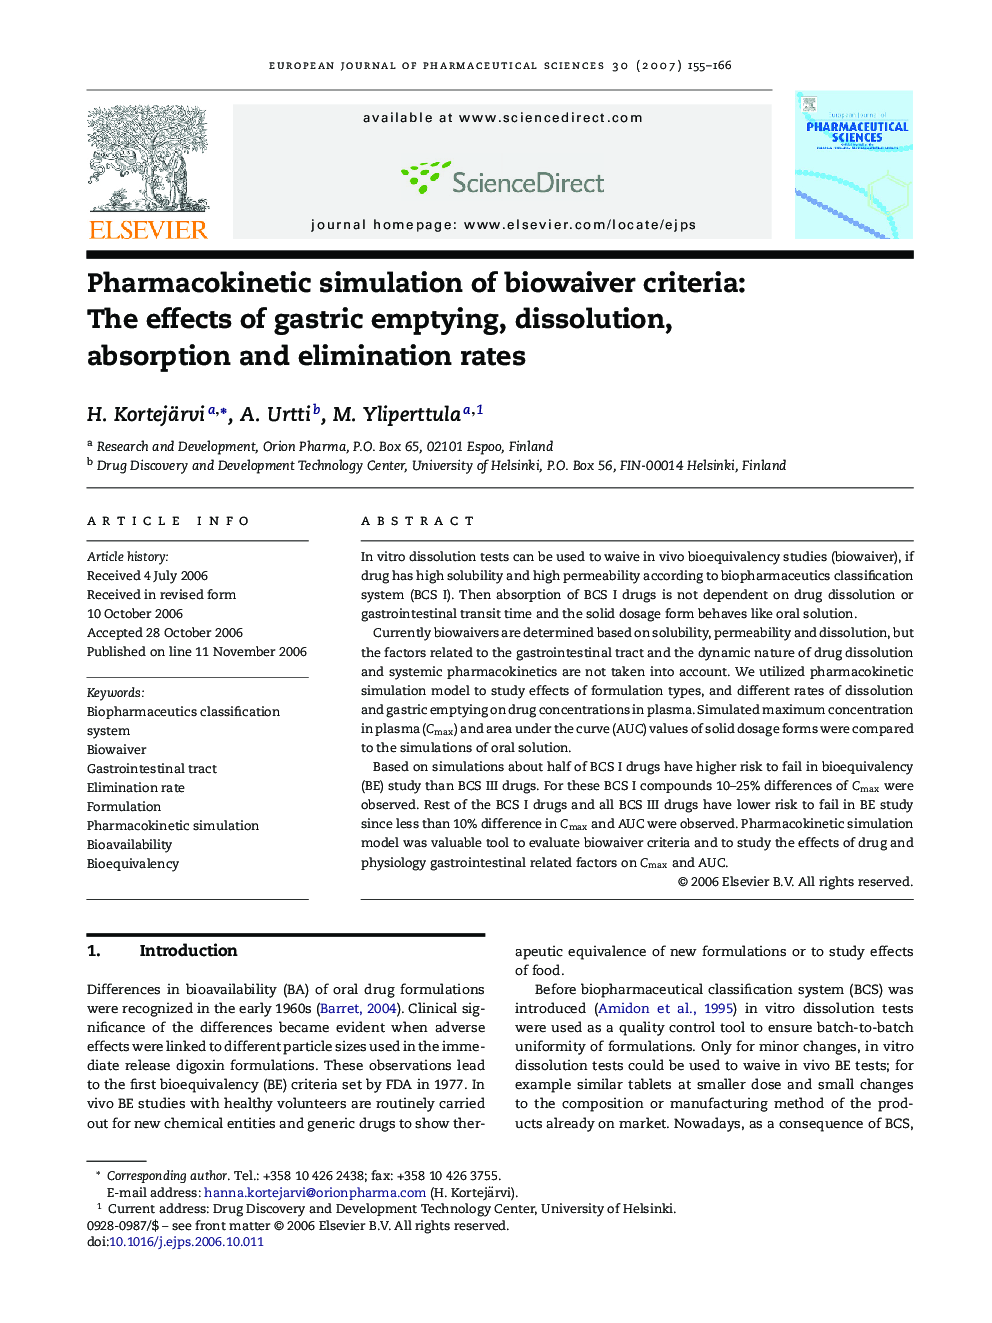 Pharmacokinetic simulation of biowaiver criteria: The effects of gastric emptying, dissolution, absorption and elimination rates